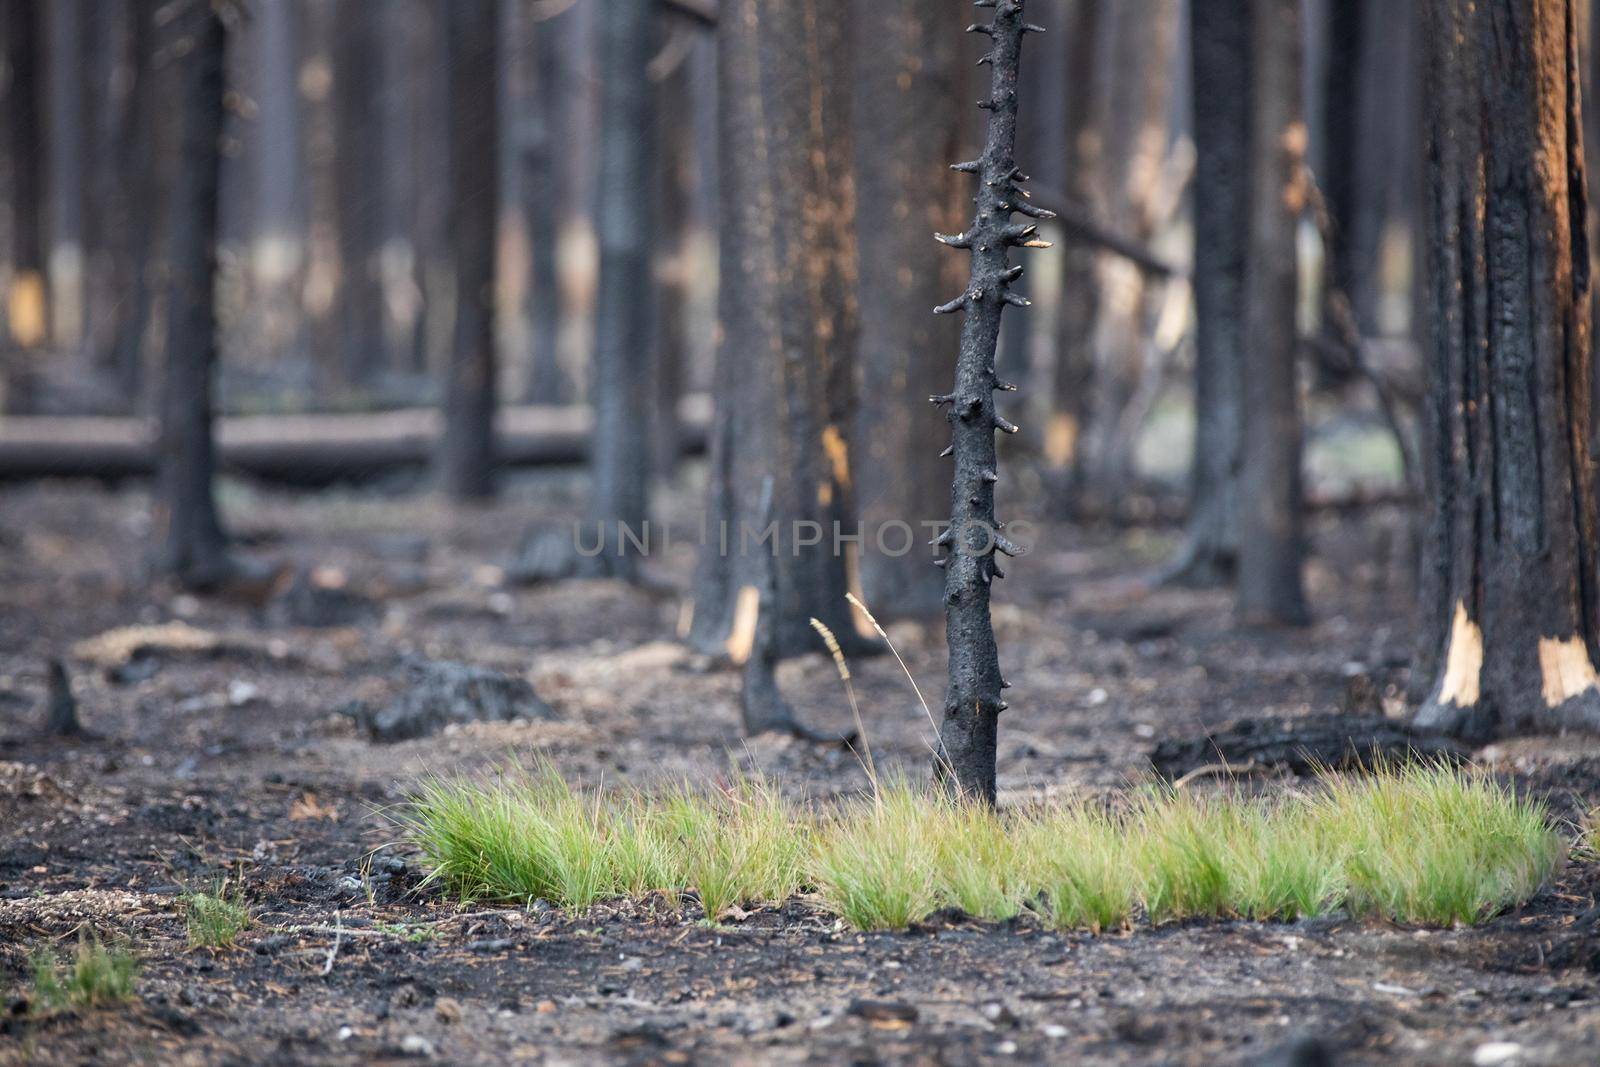 grass growing on the ground after a recent fire in the forest